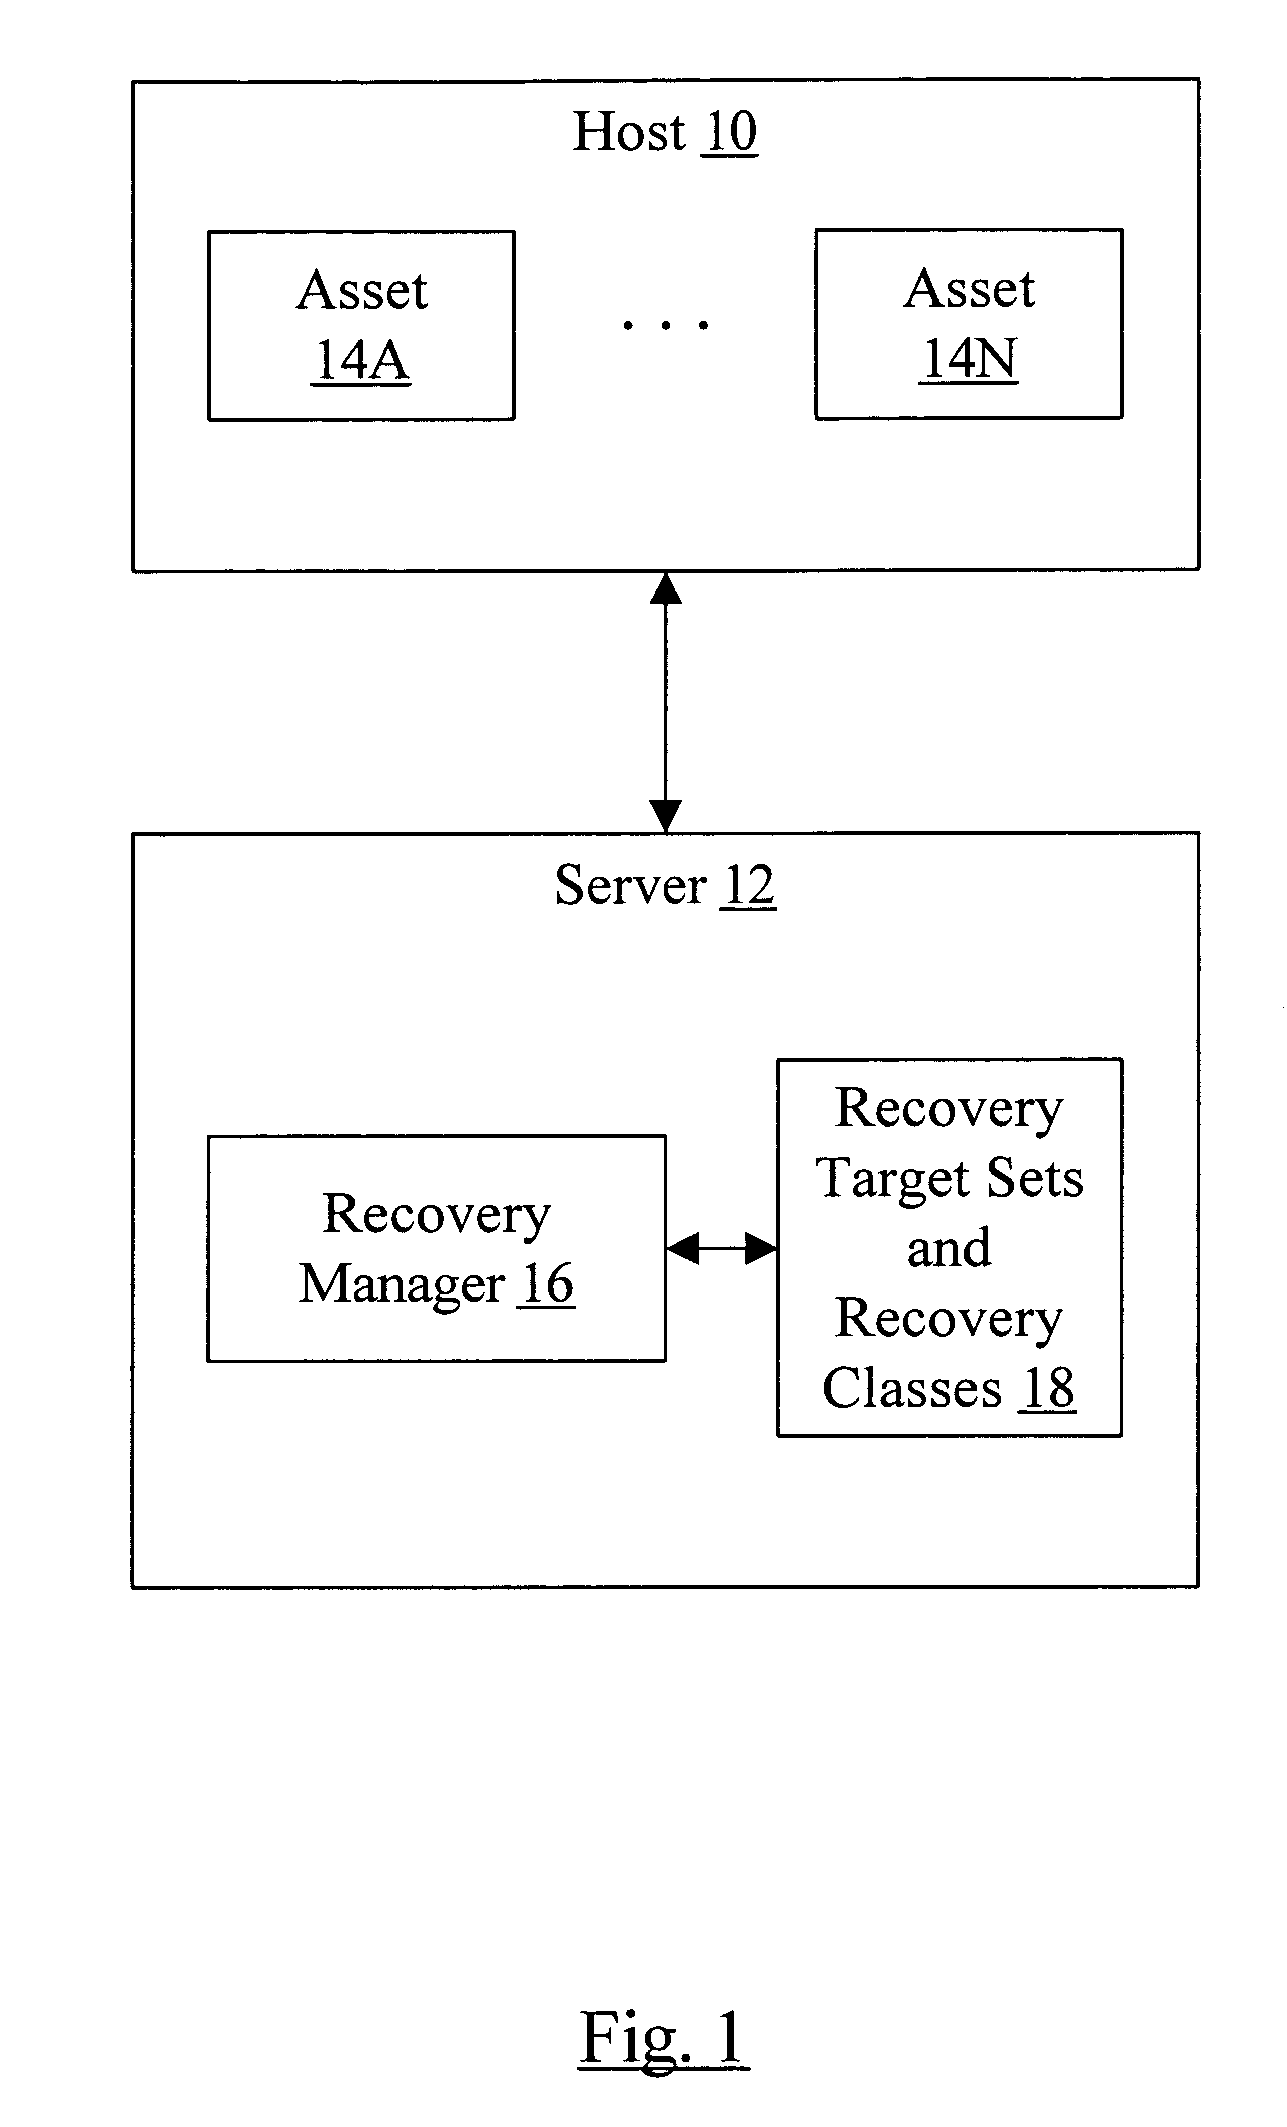 Classification of recovery targets to enable automated protection setup